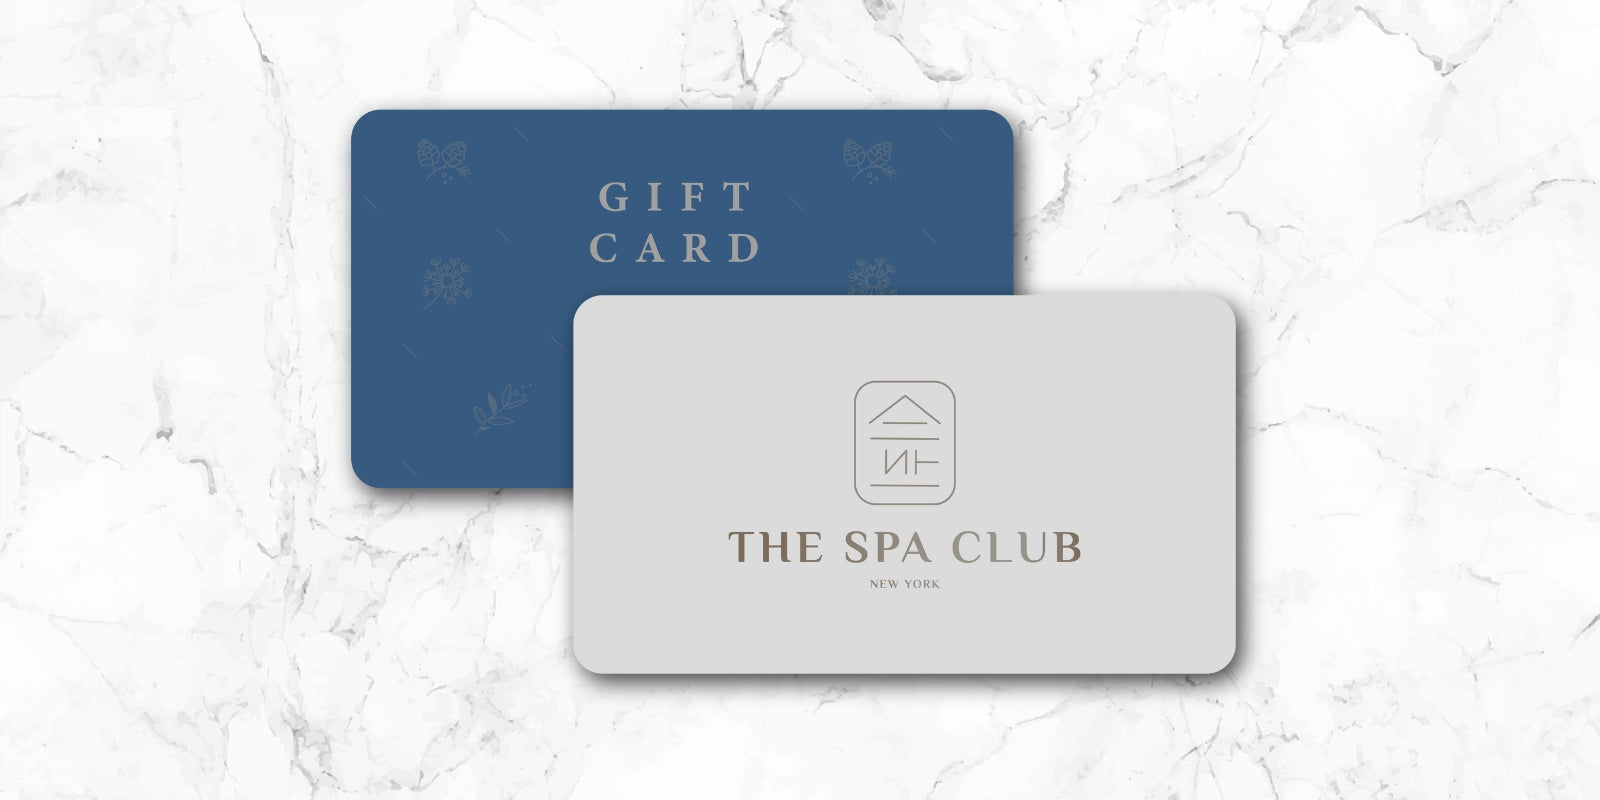 <h3>
<br>GIFT CARD <br>
</h3>